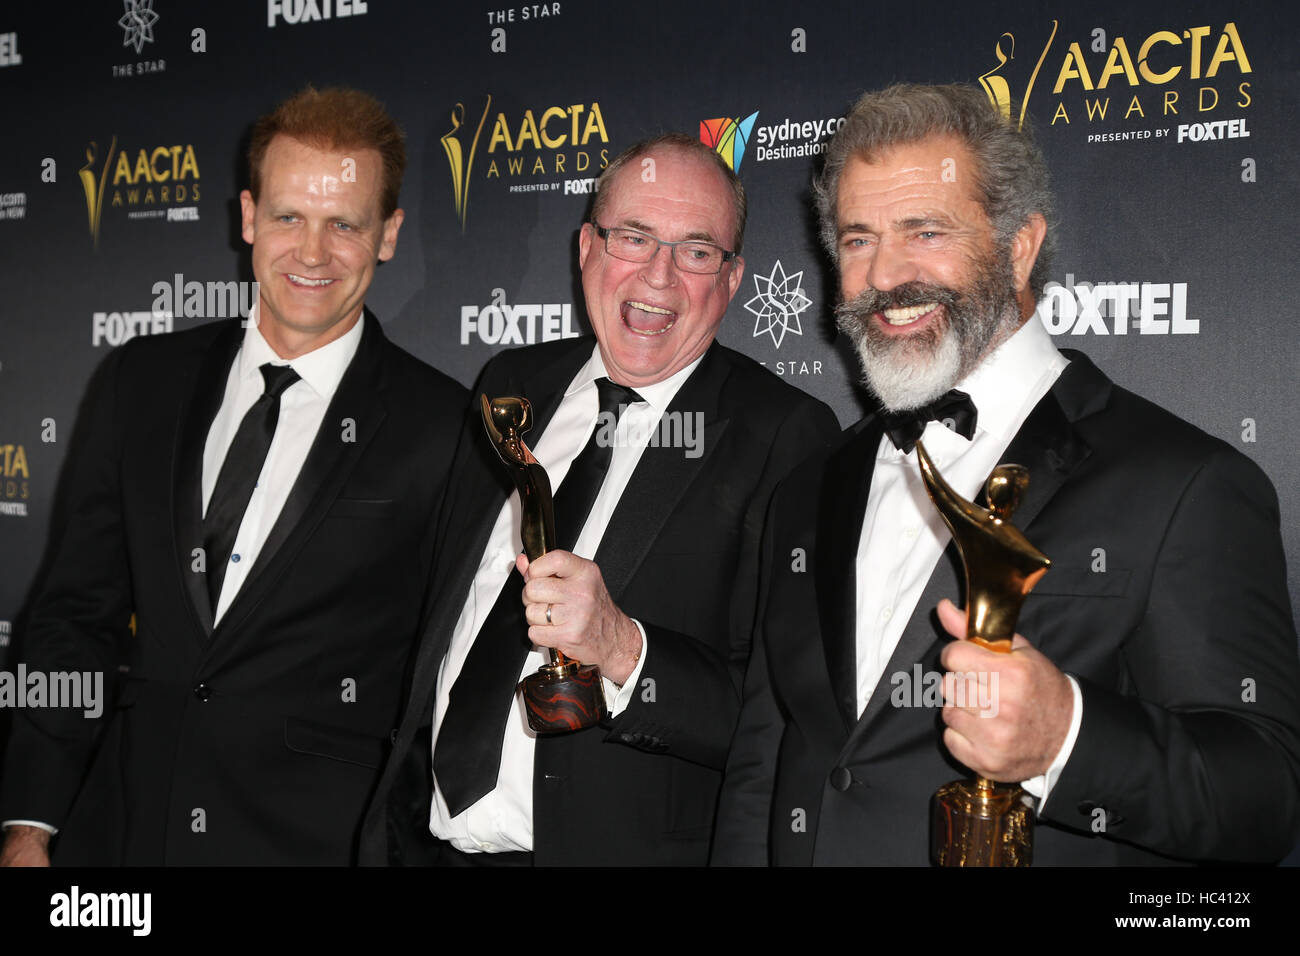 Sydney, Australia. 7 December 2016. Pictured, L-R: Paul Currie, Bruce Davey and Mel Gibson from the movie Hacksaw Ridge speak to the media and pose with their award in the media room. Celebrities, award nominees and industry figures attend the 6th AACTA (Australian Academy of Cinema and Television Arts) Awards at The Star, Pyrmont to celebrate screen excellence. Credit: Credit:  Richard Milnes/Alamy Live News Stock Photo